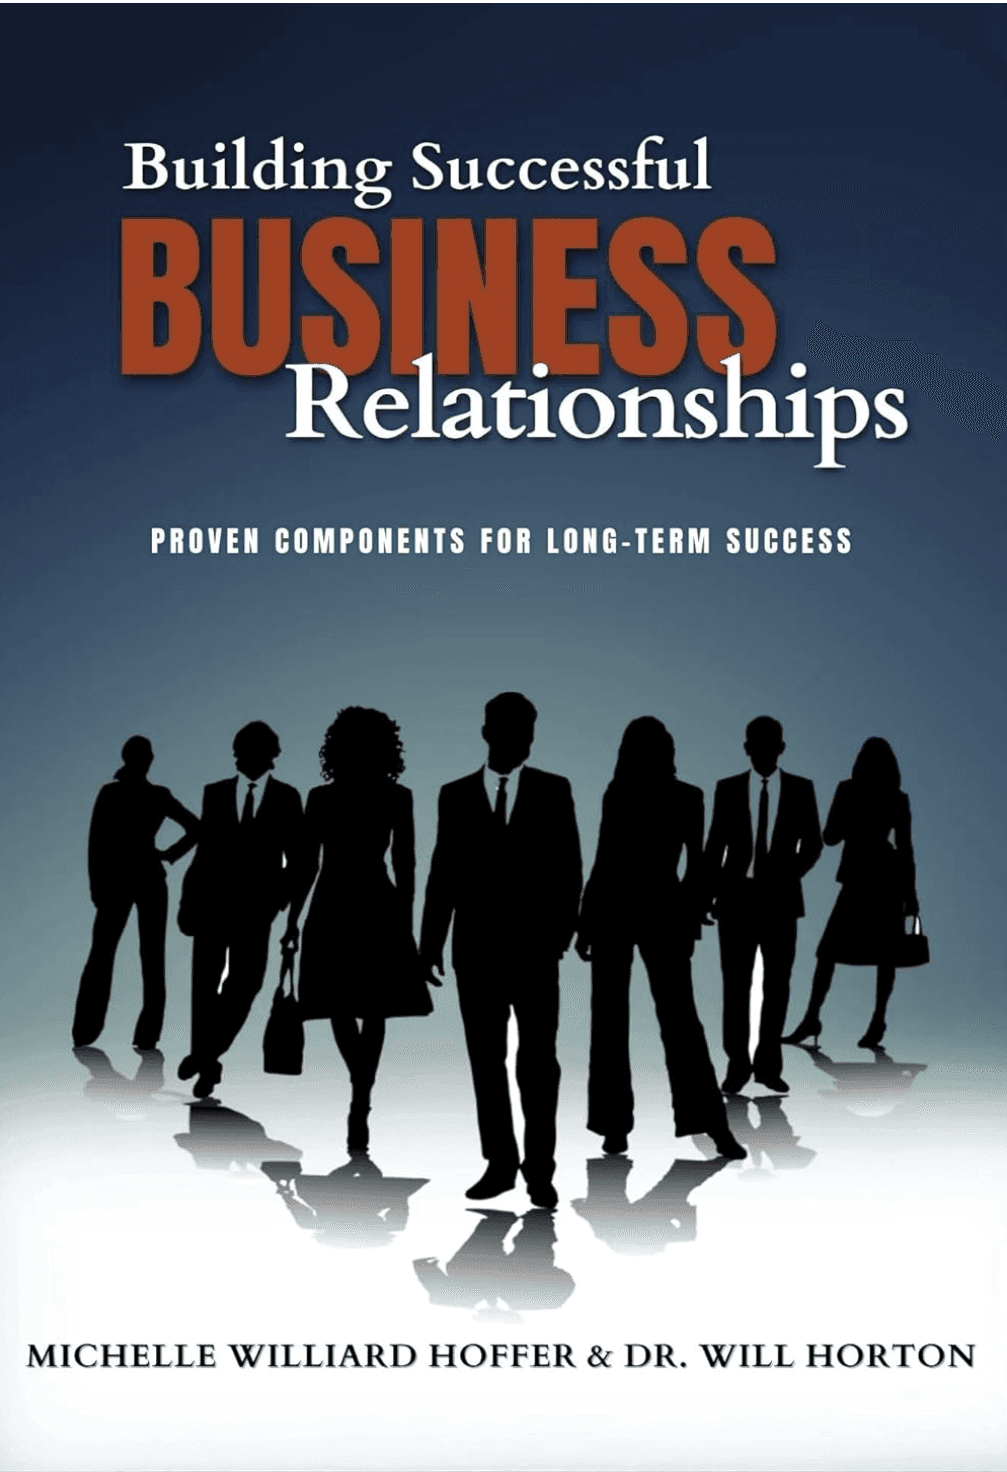 Building Successful Business Relationships: Proven Components for Long-Term Success